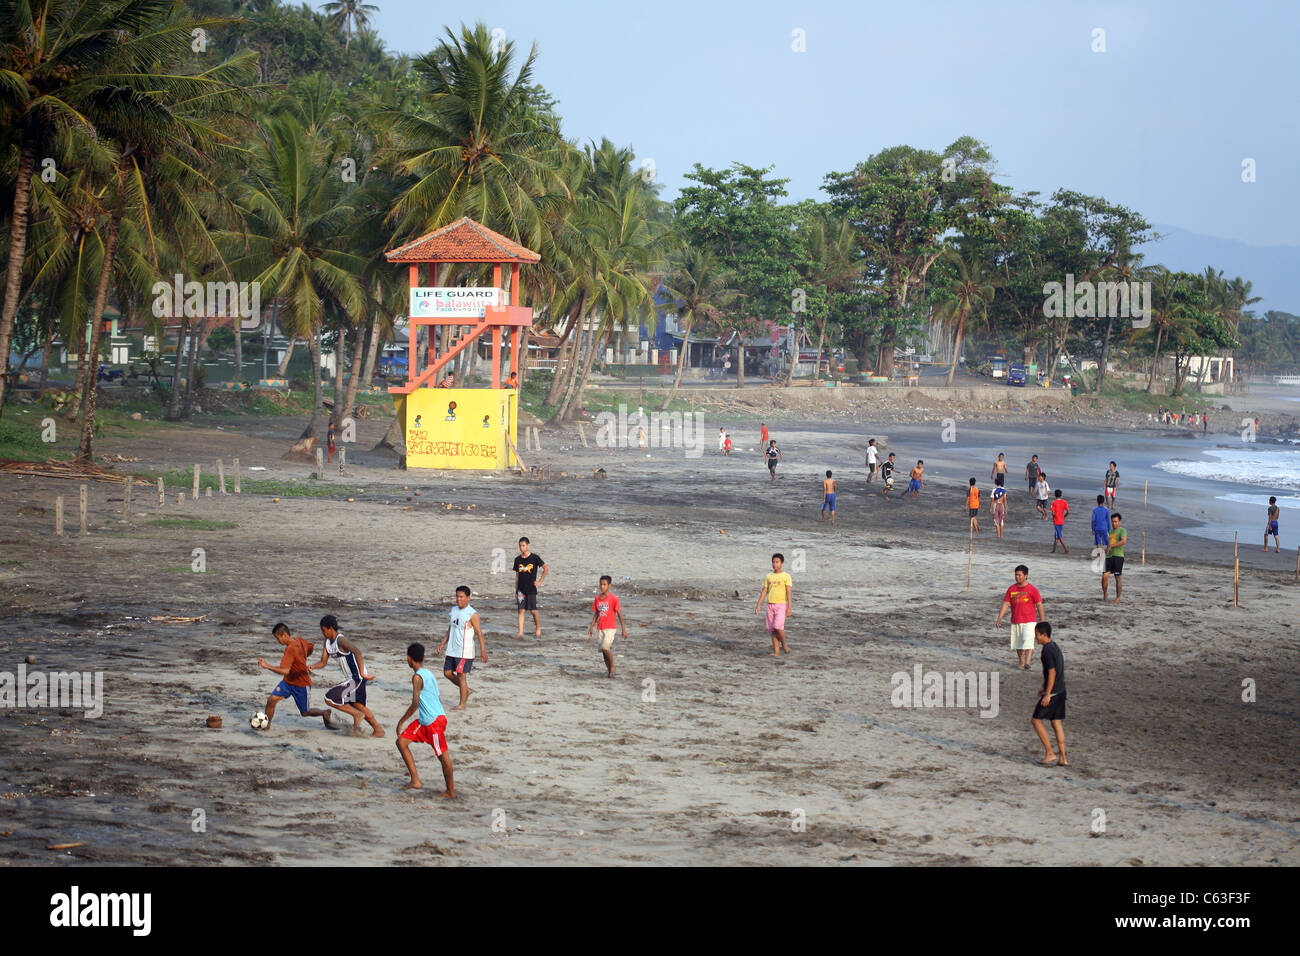 Locals playing football game on the beach at Pantai Karang Haru. Cisolok, West Java, Java, Indonesia, South-East Asia, Asia Stock Photo